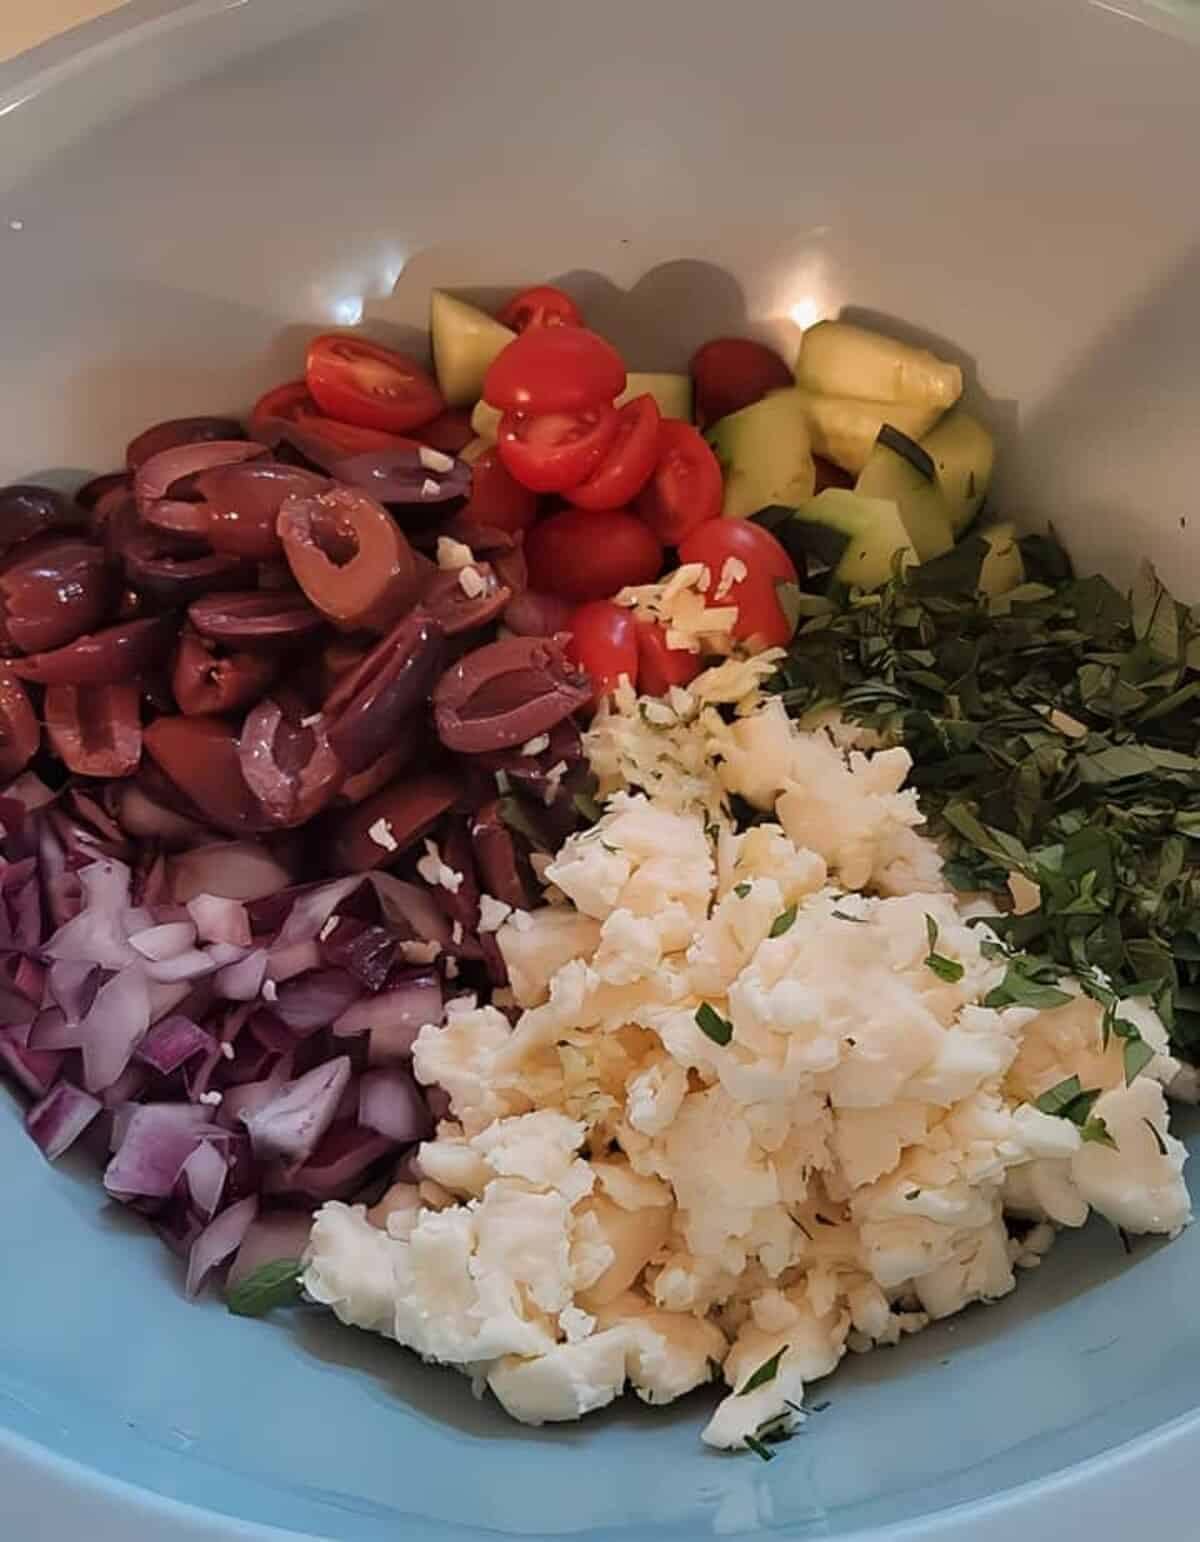 chopped ingredients for greek orzo salad. oregano, cucumber, tomato, olives, red onion, and feta cheese.